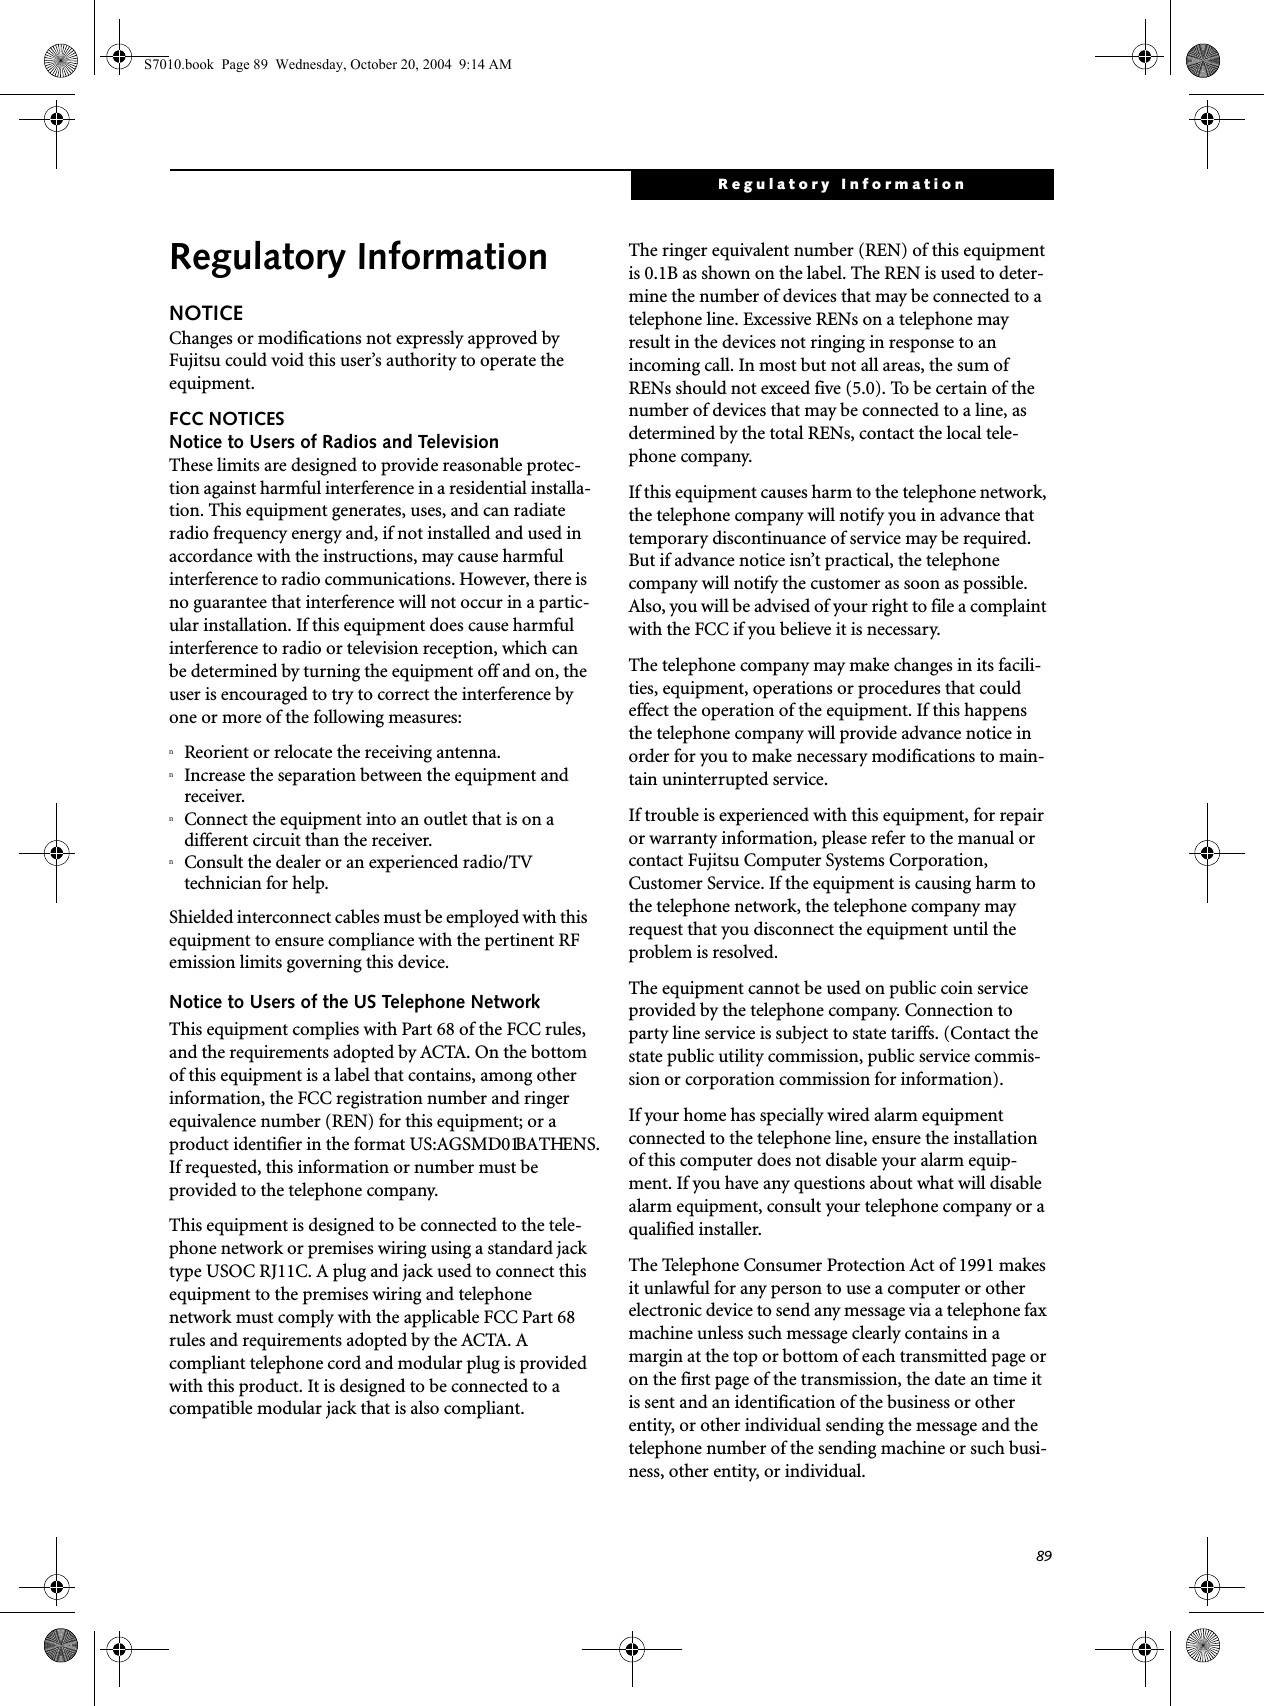 89Regulatory InformationRegulatory InformationNOTICEChanges or modifications not expressly approved by Fujitsu could void this user’s authority to operate the equipment.FCC NOTICESNotice to Users of Radios and TelevisionThese limits are designed to provide reasonable protec-tion against harmful interference in a residential installa-tion. This equipment generates, uses, and can radiate radio frequency energy and, if not installed and used in accordance with the instructions, may cause harmful interference to radio communications. However, there is no guarantee that interference will not occur in a partic-ular installation. If this equipment does cause harmful interference to radio or television reception, which can be determined by turning the equipment off and on, the user is encouraged to try to correct the interference by one or more of the following measures:nReorient or relocate the receiving antenna.nIncrease the separation between the equipment and receiver.nConnect the equipment into an outlet that is on a different circuit than the receiver.nConsult the dealer or an experienced radio/TVtechnician for help.Shielded interconnect cables must be employed with this equipment to ensure compliance with the pertinent RF emission limits governing this device. Notice to Users of the US Telephone NetworkThis equipment complies with Part 68 of the FCC rules, and the requirements adopted by ACTA. On the bottom of this equipment is a label that contains, among other information, the FCC registration number and ringer equivalence number (REN) for this equipment; or a product identifier in the format US:AGSMD01BATHENS. If requested, this information or number must be provided to the telephone company.This equipment is designed to be connected to the tele-phone network or premises wiring using a standard jack type USOC RJ11C. A plug and jack used to connect this equipment to the premises wiring and telephone network must comply with the applicable FCC Part 68 rules and requirements adopted by the ACTA. A compliant telephone cord and modular plug is provided with this product. It is designed to be connected to a compatible modular jack that is also compliant.The ringer equivalent number (REN) of this equipment is 0.1B as shown on the label. The REN is used to deter-mine the number of devices that may be connected to a telephone line. Excessive RENs on a telephone may result in the devices not ringing in response to an incoming call. In most but not all areas, the sum of RENs should not exceed five (5.0). To be certain of the number of devices that may be connected to a line, as determined by the total RENs, contact the local tele-phone company. If this equipment causes harm to the telephone network, the telephone company will notify you in advance that temporary discontinuance of service may be required. But if advance notice isn’t practical, the telephone company will notify the customer as soon as possible. Also, you will be advised of your right to file a complaint with the FCC if you believe it is necessary.The telephone company may make changes in its facili-ties, equipment, operations or procedures that could effect the operation of the equipment. If this happens the telephone company will provide advance notice in order for you to make necessary modifications to main-tain uninterrupted service. If trouble is experienced with this equipment, for repair or warranty information, please refer to the manual or contact Fujitsu Computer Systems Corporation, Customer Service. If the equipment is causing harm to the telephone network, the telephone company may request that you disconnect the equipment until the problem is resolved.The equipment cannot be used on public coin service provided by the telephone company. Connection to party line service is subject to state tariffs. (Contact the state public utility commission, public service commis-sion or corporation commission for information). If your home has specially wired alarm equipment connected to the telephone line, ensure the installation of this computer does not disable your alarm equip-ment. If you have any questions about what will disable alarm equipment, consult your telephone company or a qualified installer.The Telephone Consumer Protection Act of 1991 makes it unlawful for any person to use a computer or other electronic device to send any message via a telephone fax machine unless such message clearly contains in a margin at the top or bottom of each transmitted page or on the first page of the transmission, the date an time it is sent and an identification of the business or other entity, or other individual sending the message and the telephone number of the sending machine or such busi-ness, other entity, or individual.S7010.book  Page 89  Wednesday, October 20, 2004  9:14 AM